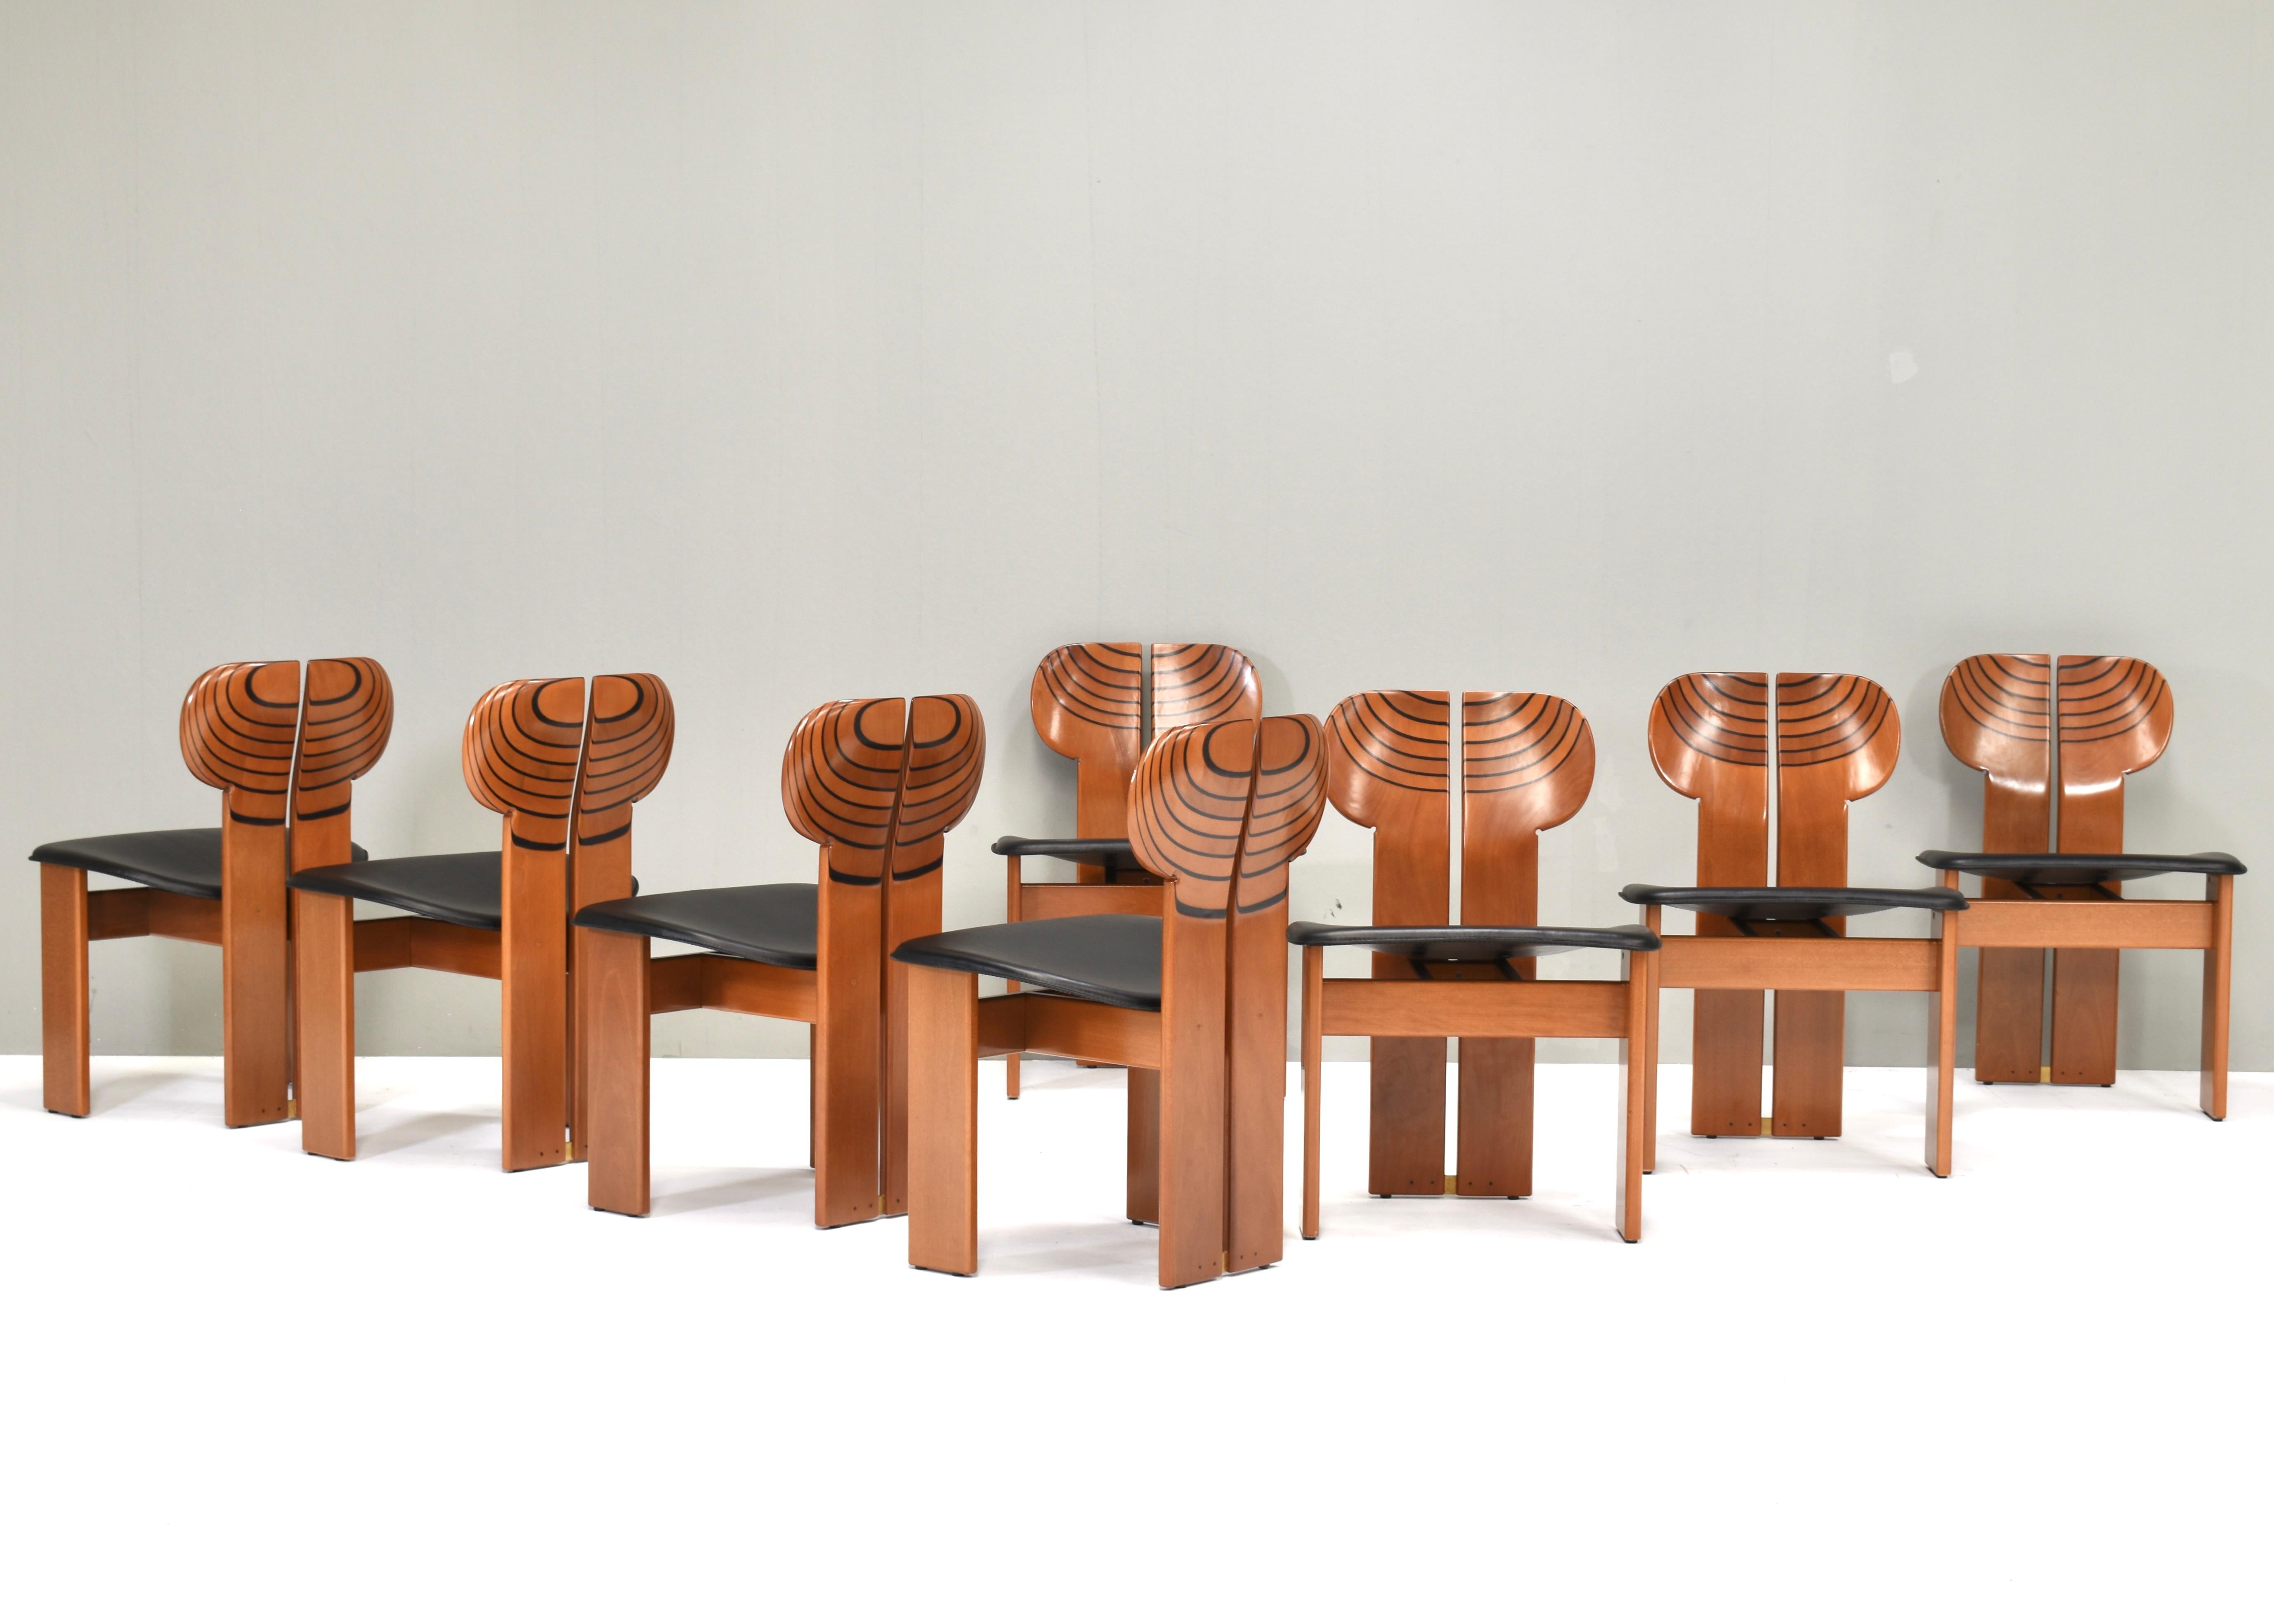 Artona series Africa dining chairs by Afra & Tobia Scarpa for Maxalto – Italy, 1970’s.
Amazing set of 8 Africa chairs made of Italian Walnut with black leather seats and brass details. The set is in amazing condition.

Designer: Afra & Tobia